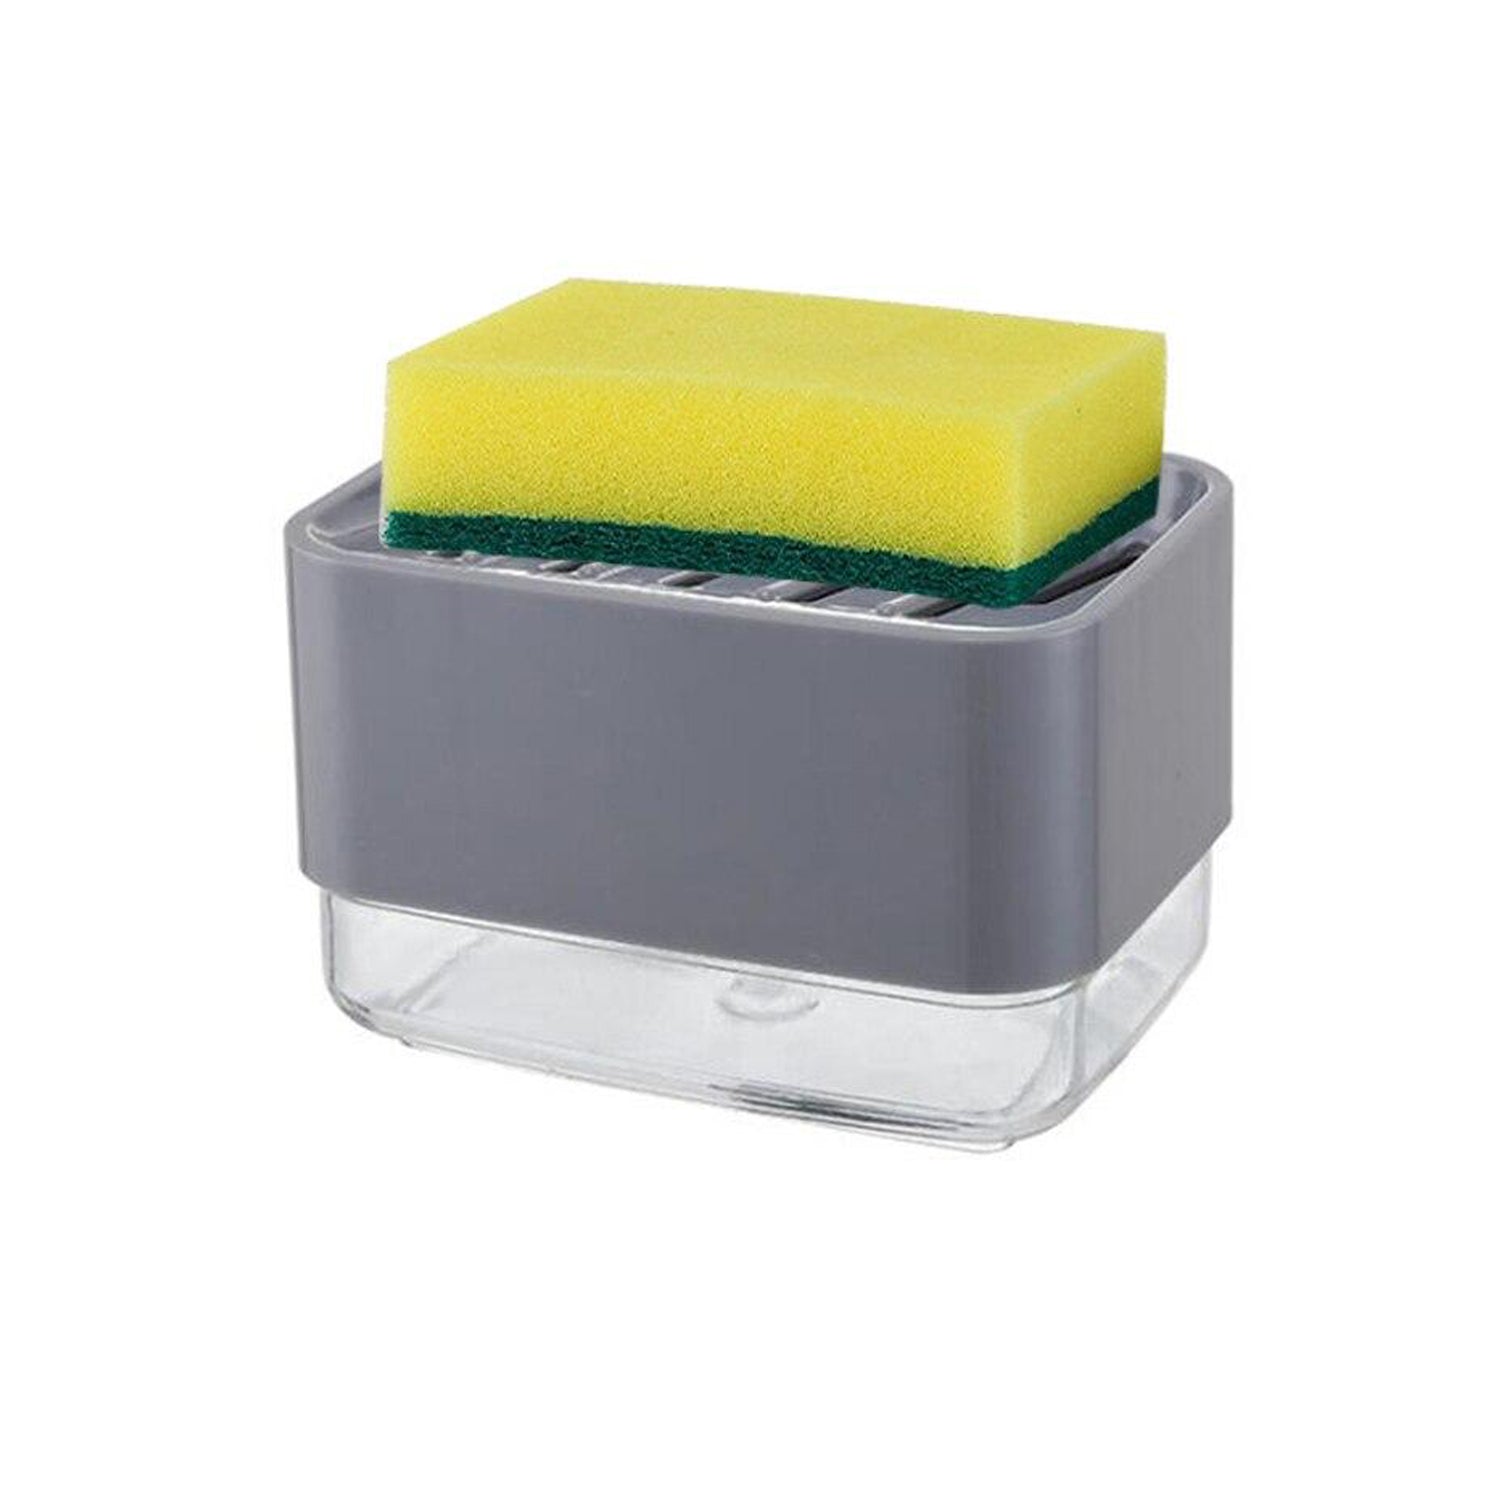 6206 2 in 1 Soap Dispenser Used As A Soap Holder In Bathrooms And Toilets.